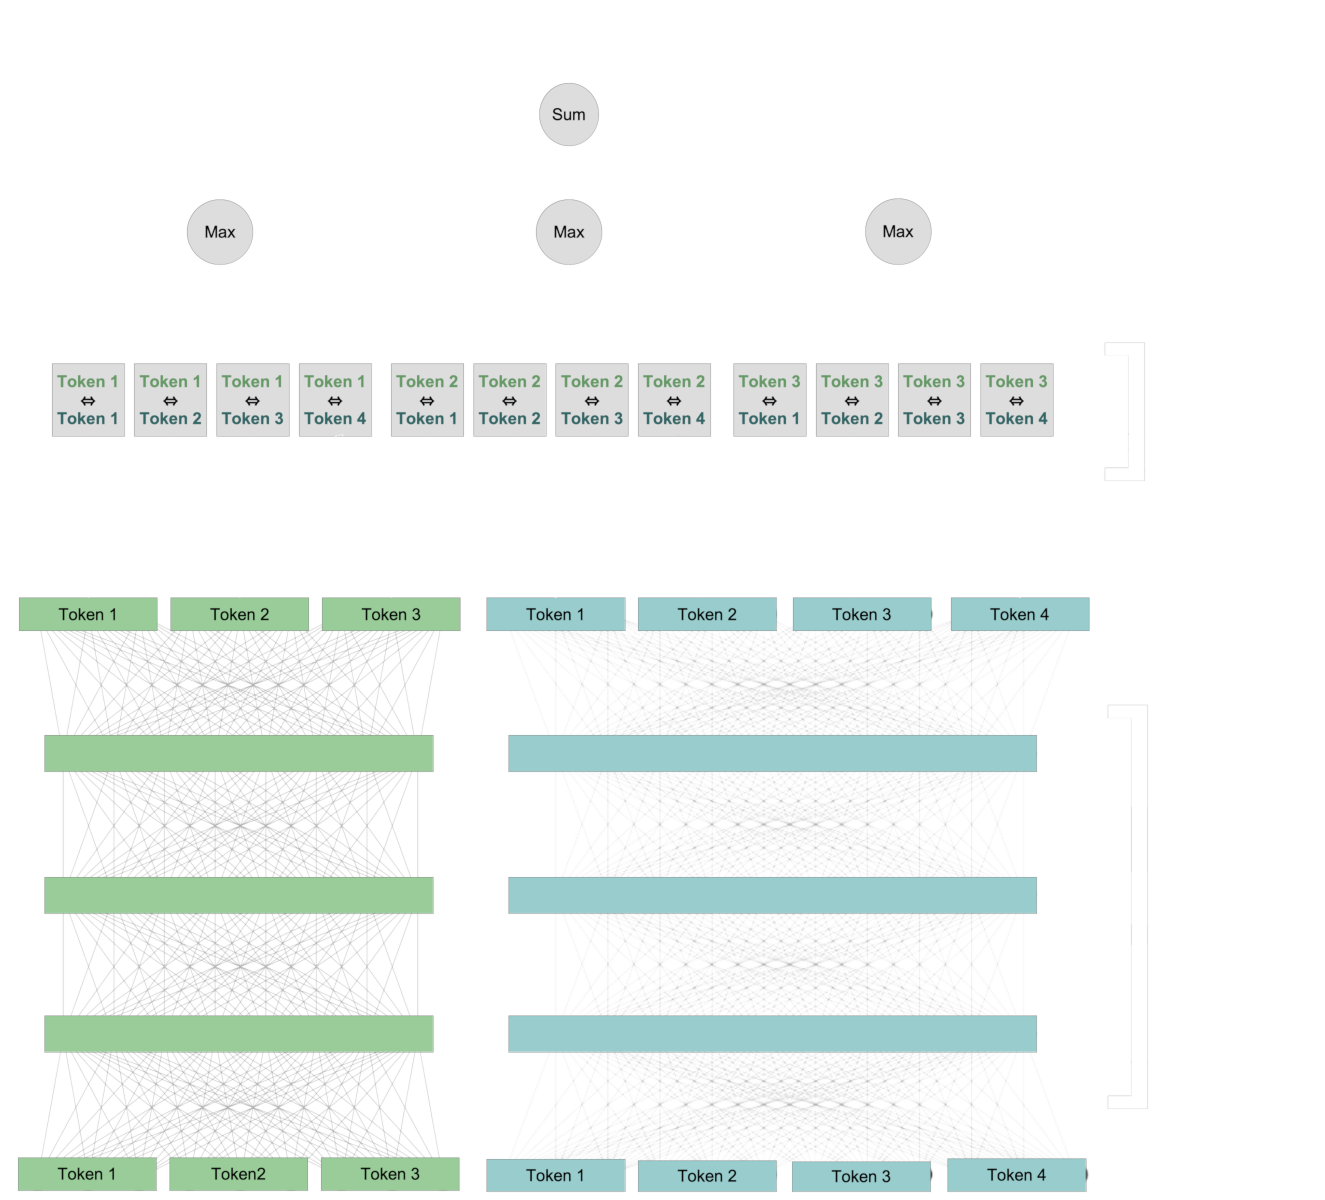 Detailed diagram showing computational model with tokens, scored and categorized into "Early" and "Late" interactions.